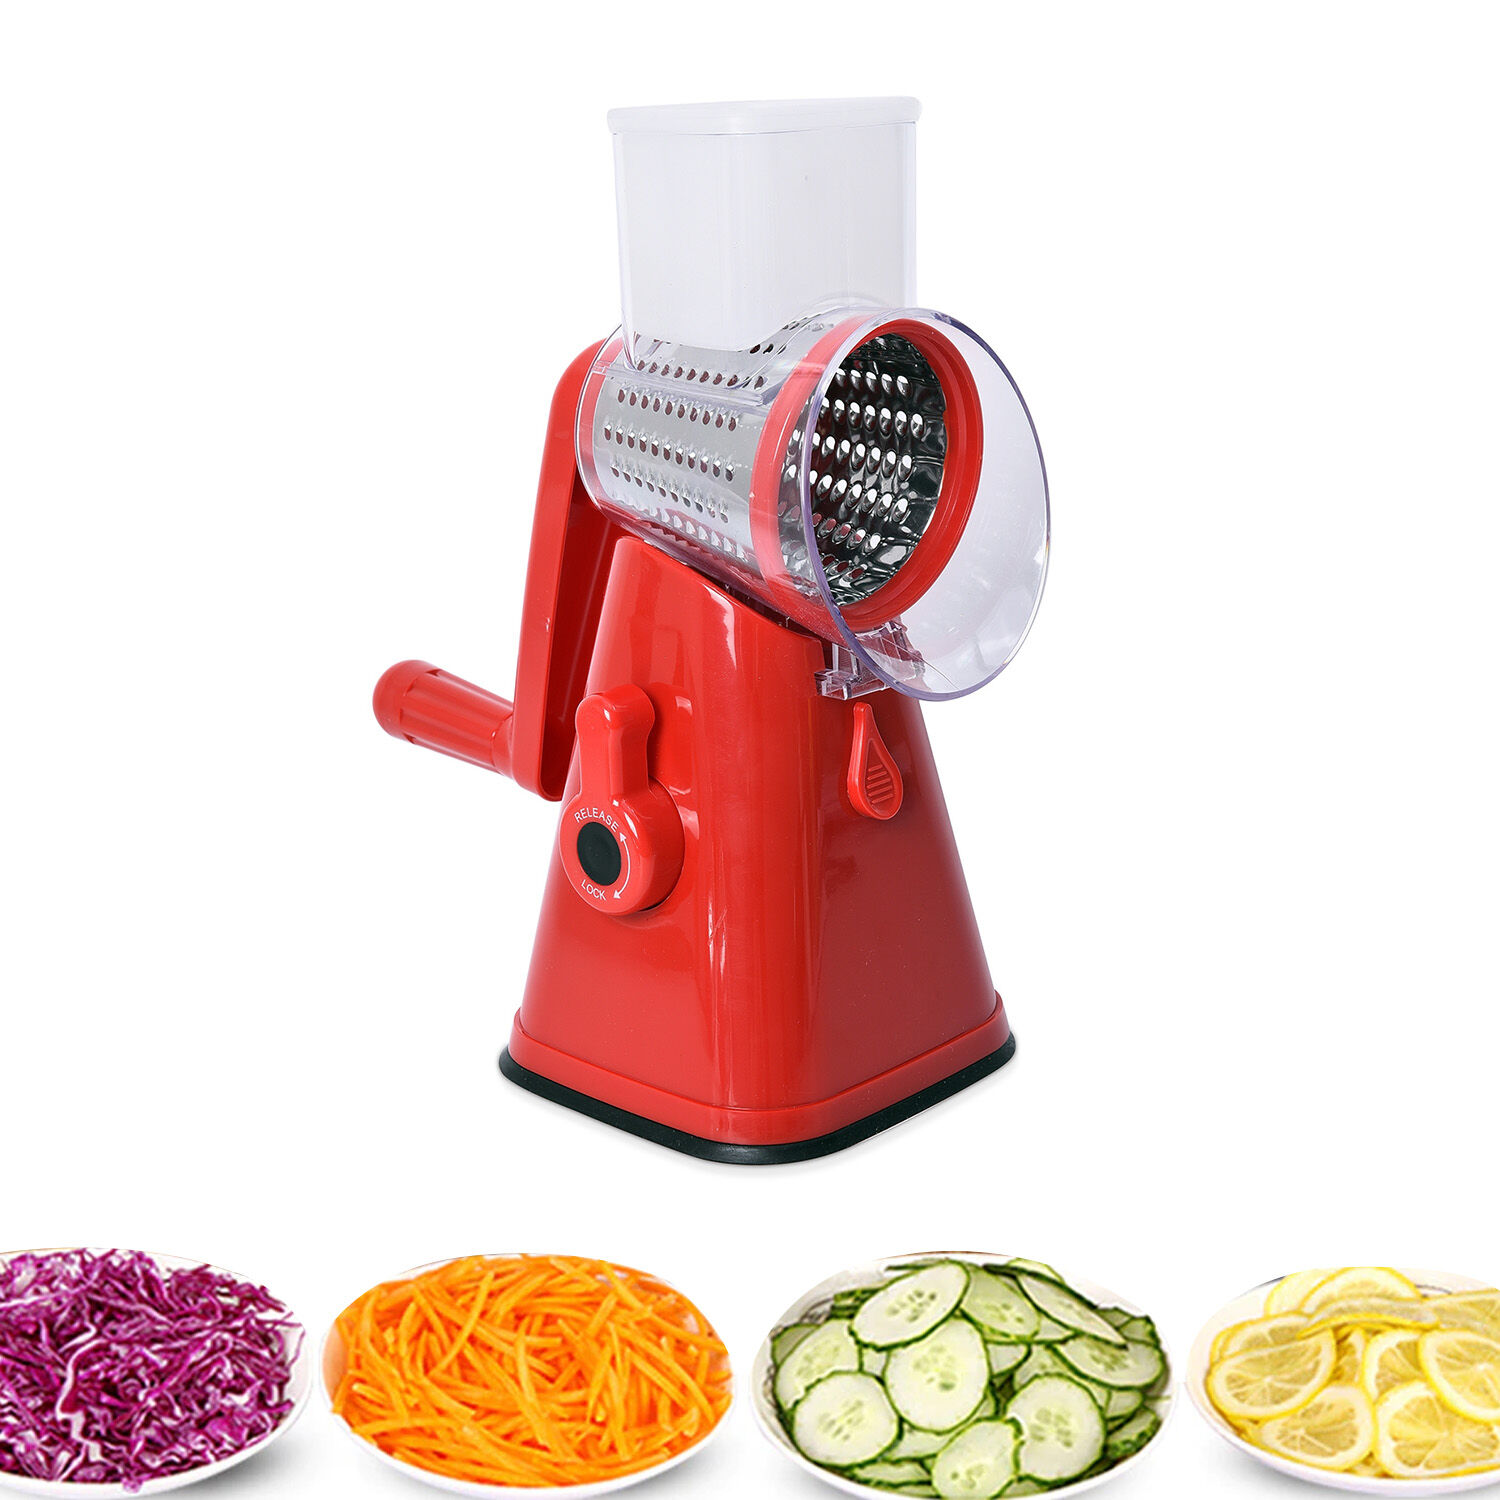 TJC 3 in 1 Easyway Vegetable and Fruit Slicer with One Slicing Red Shredding and Grating Blade Size 18x14x28 cm 